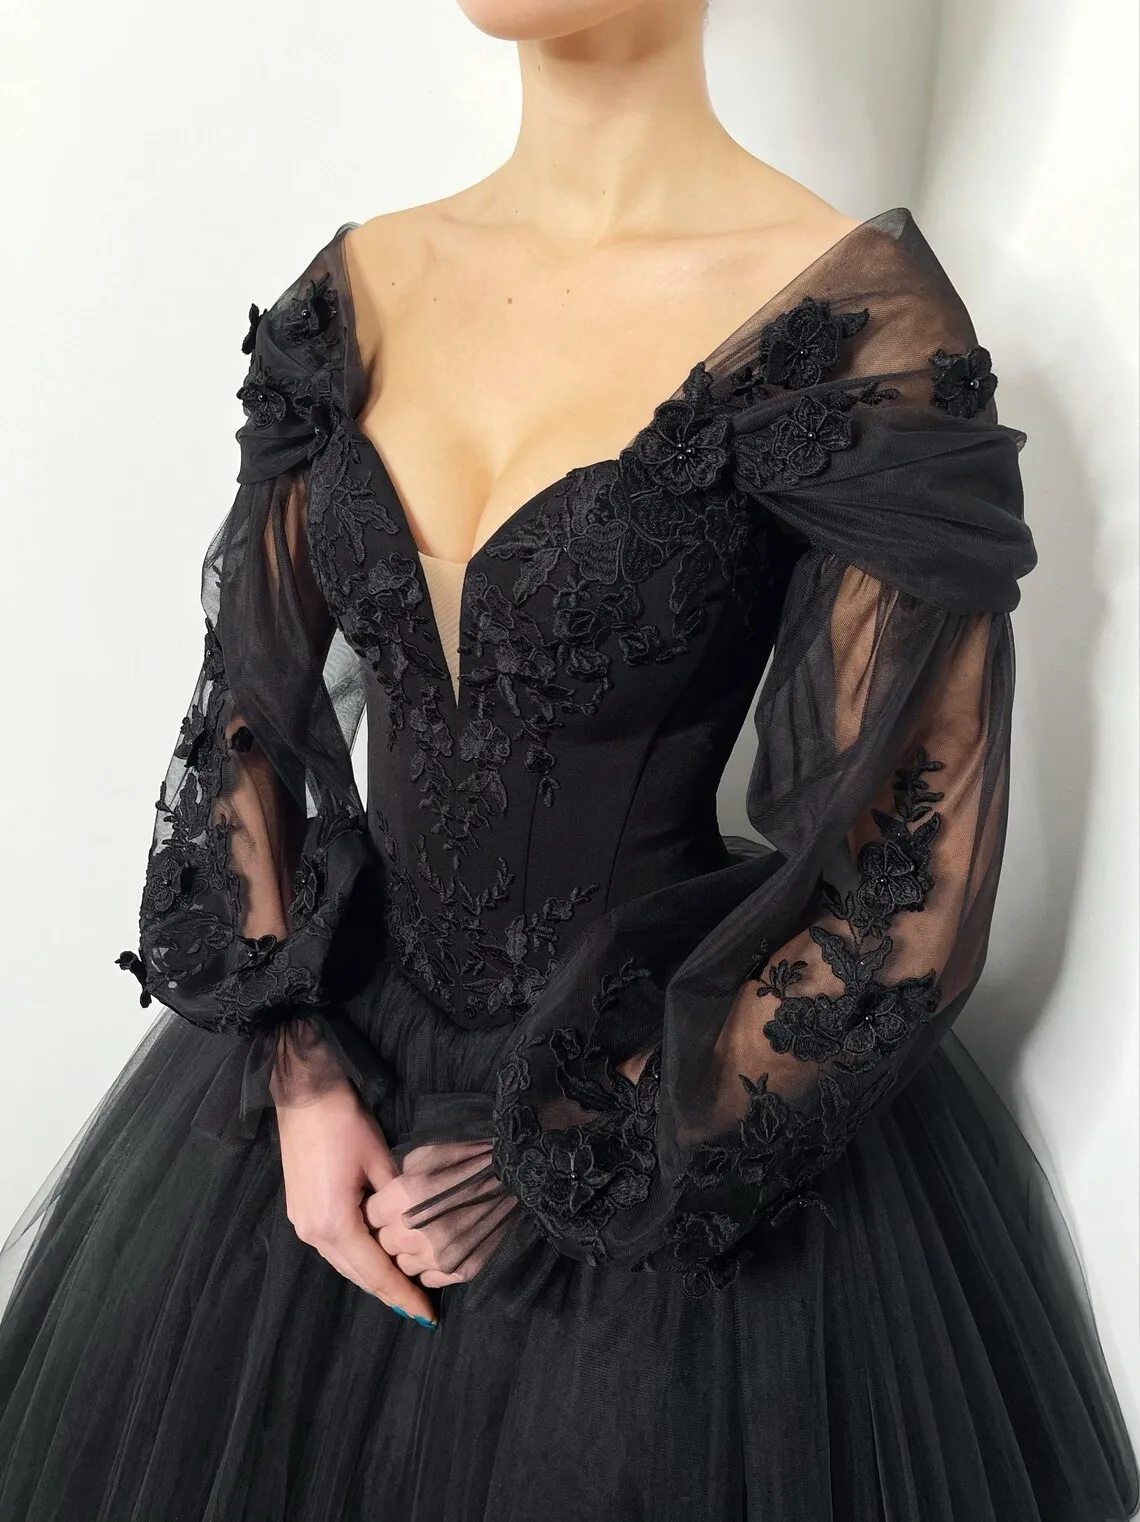 Black Evening Dresses Goethe Lace Applique Tulle Off Shoulder Puffy Full Sleeves A Line Long Chapel Train Party Prom Gowns